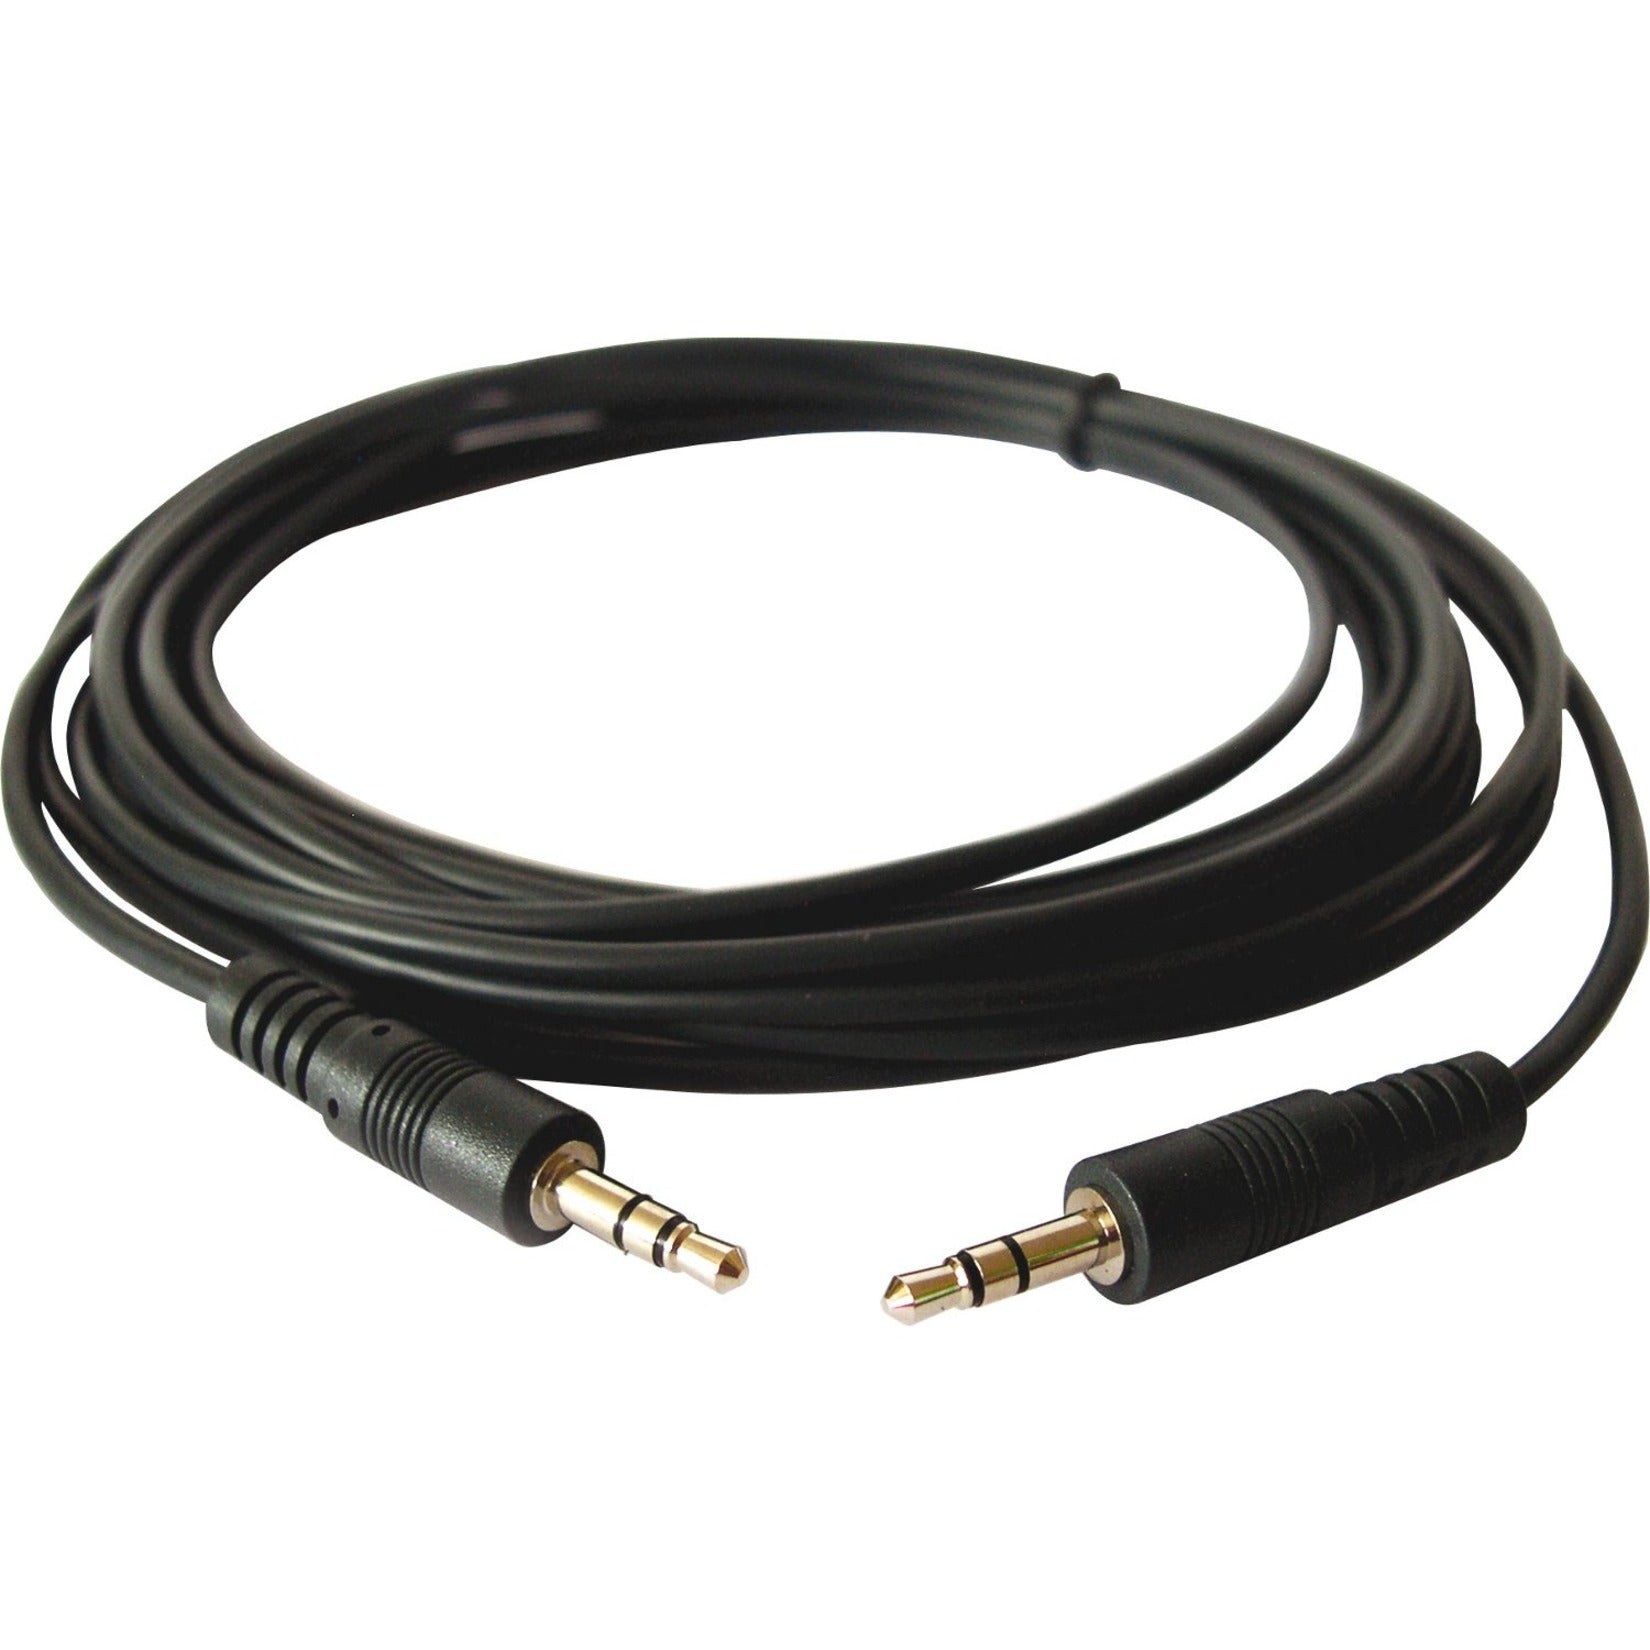 Kramer 95-0101010 3.5mm (M) to 3.5mm (M) Stereo Audio Cable, 10 ft, Molded, Copper Shielding